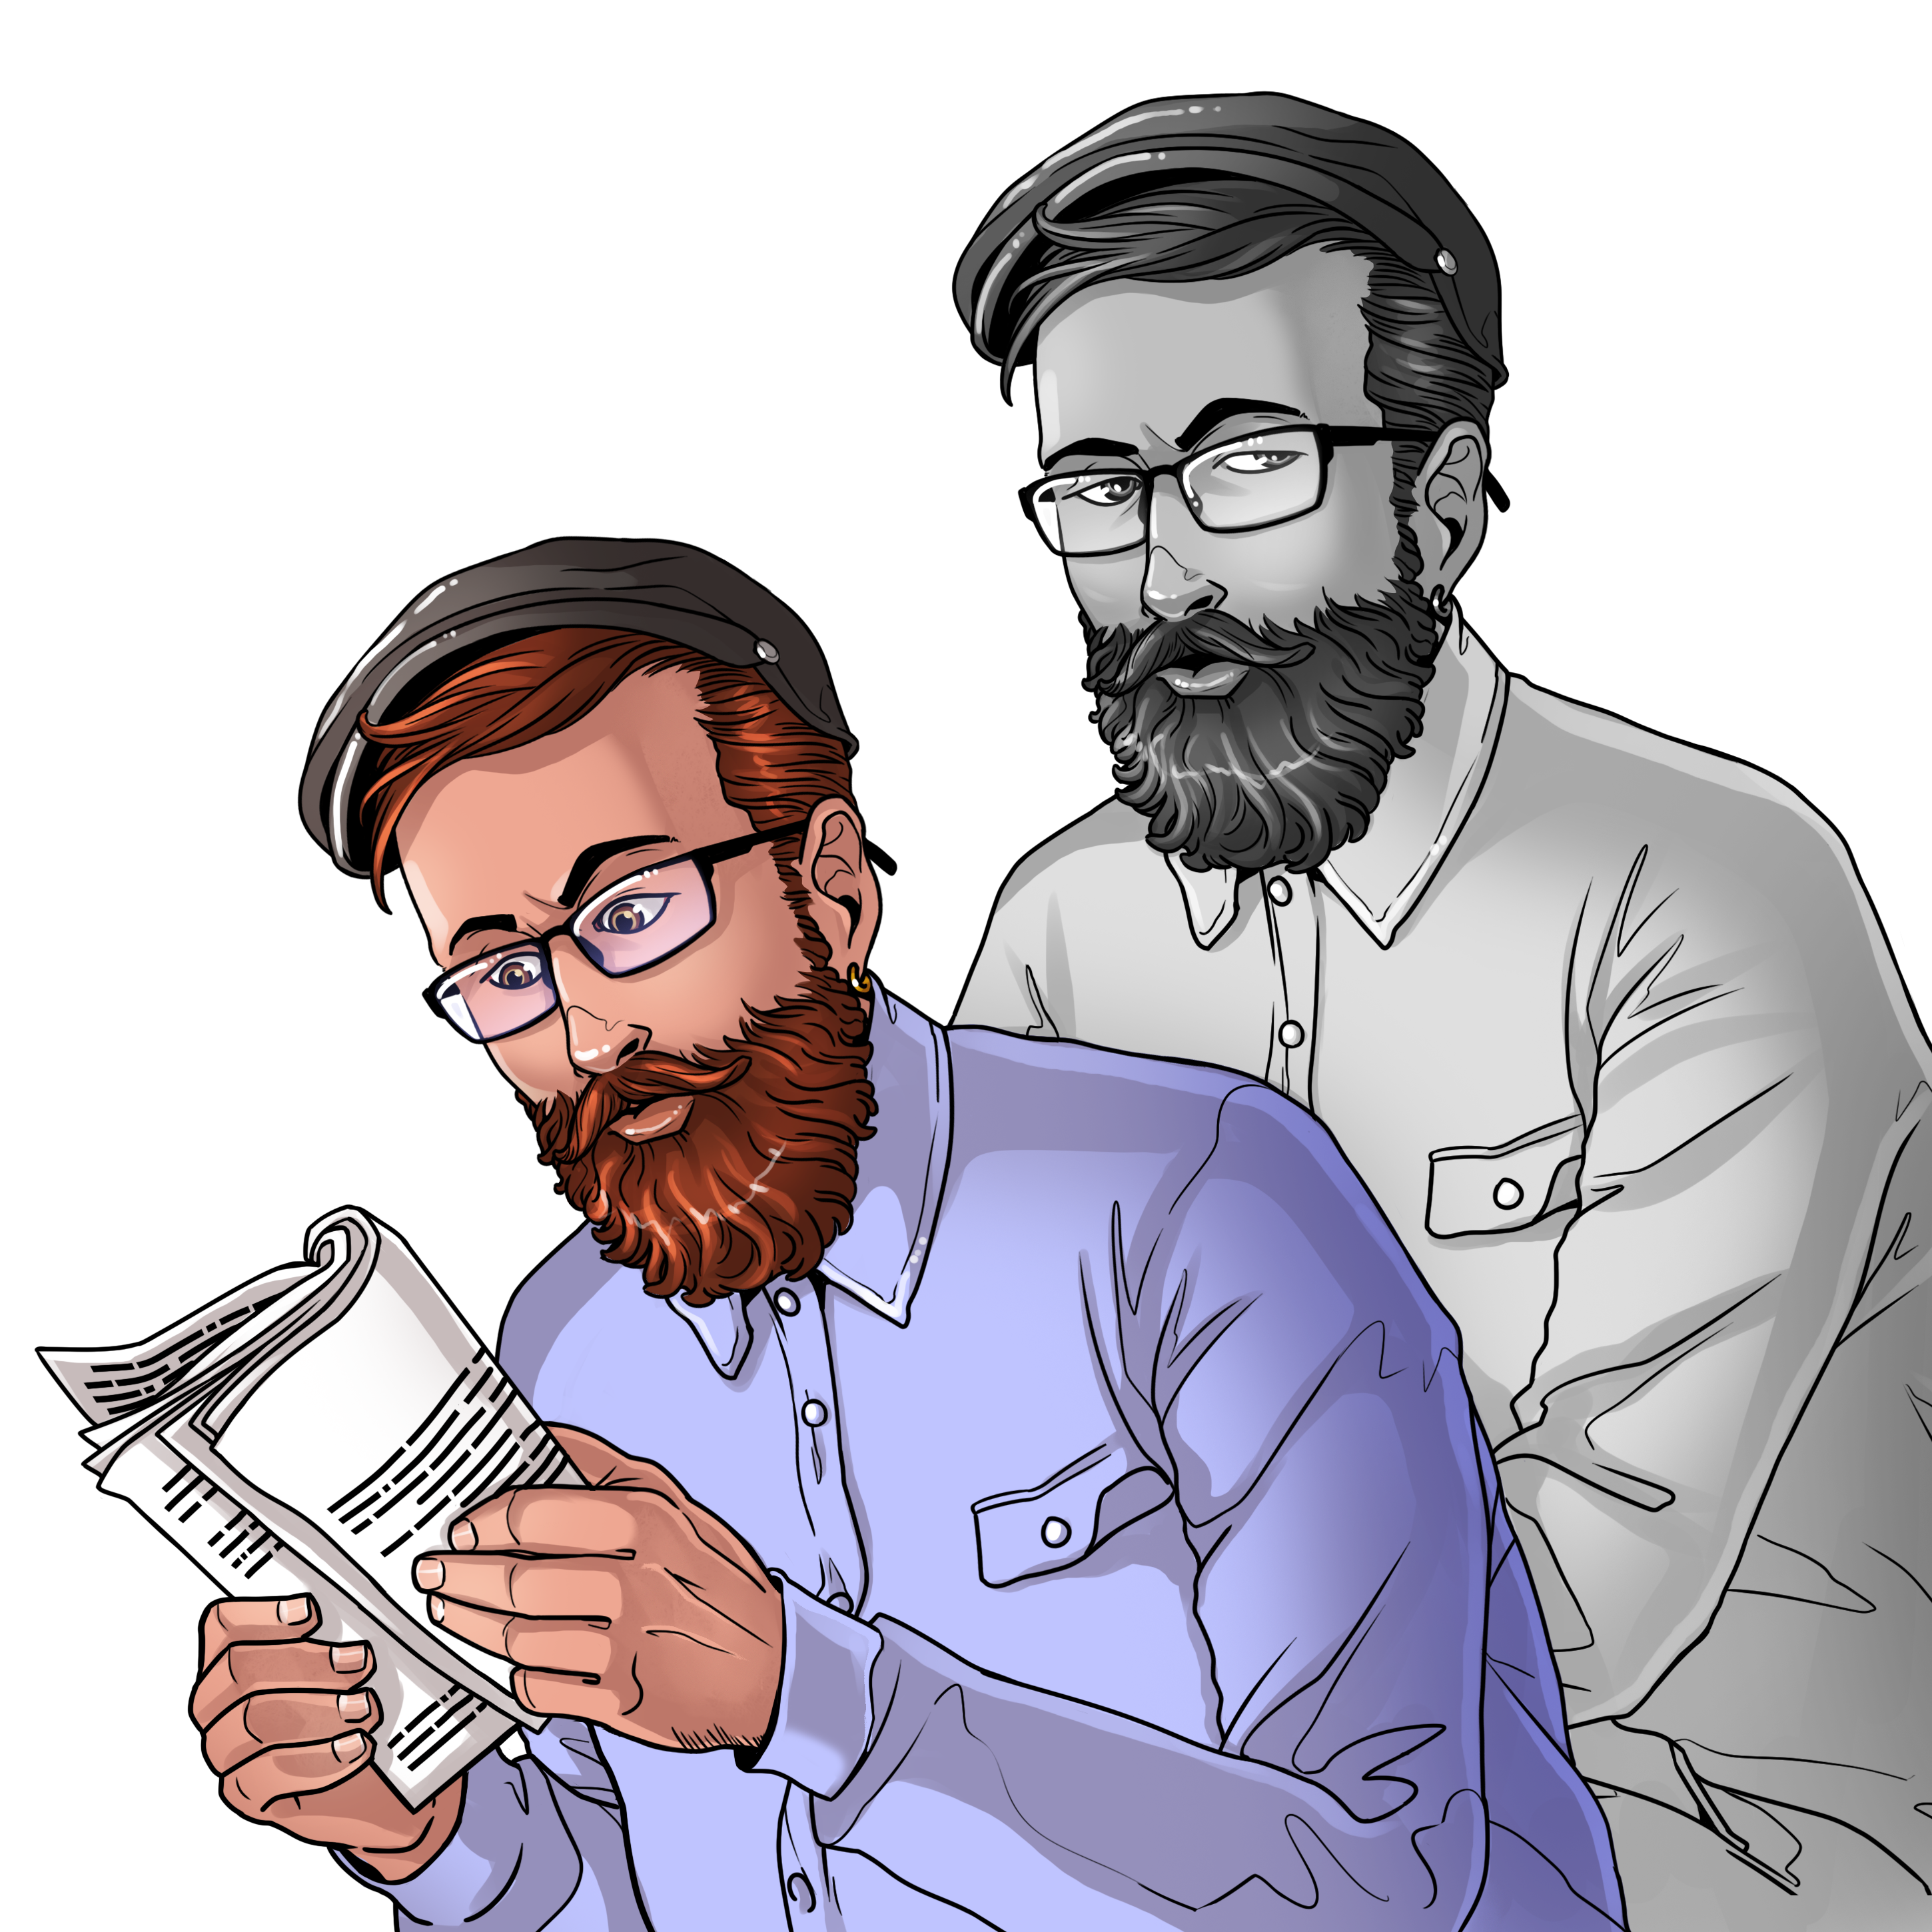 Subskrybuj Newsletter Magazine by Cointelegraph.